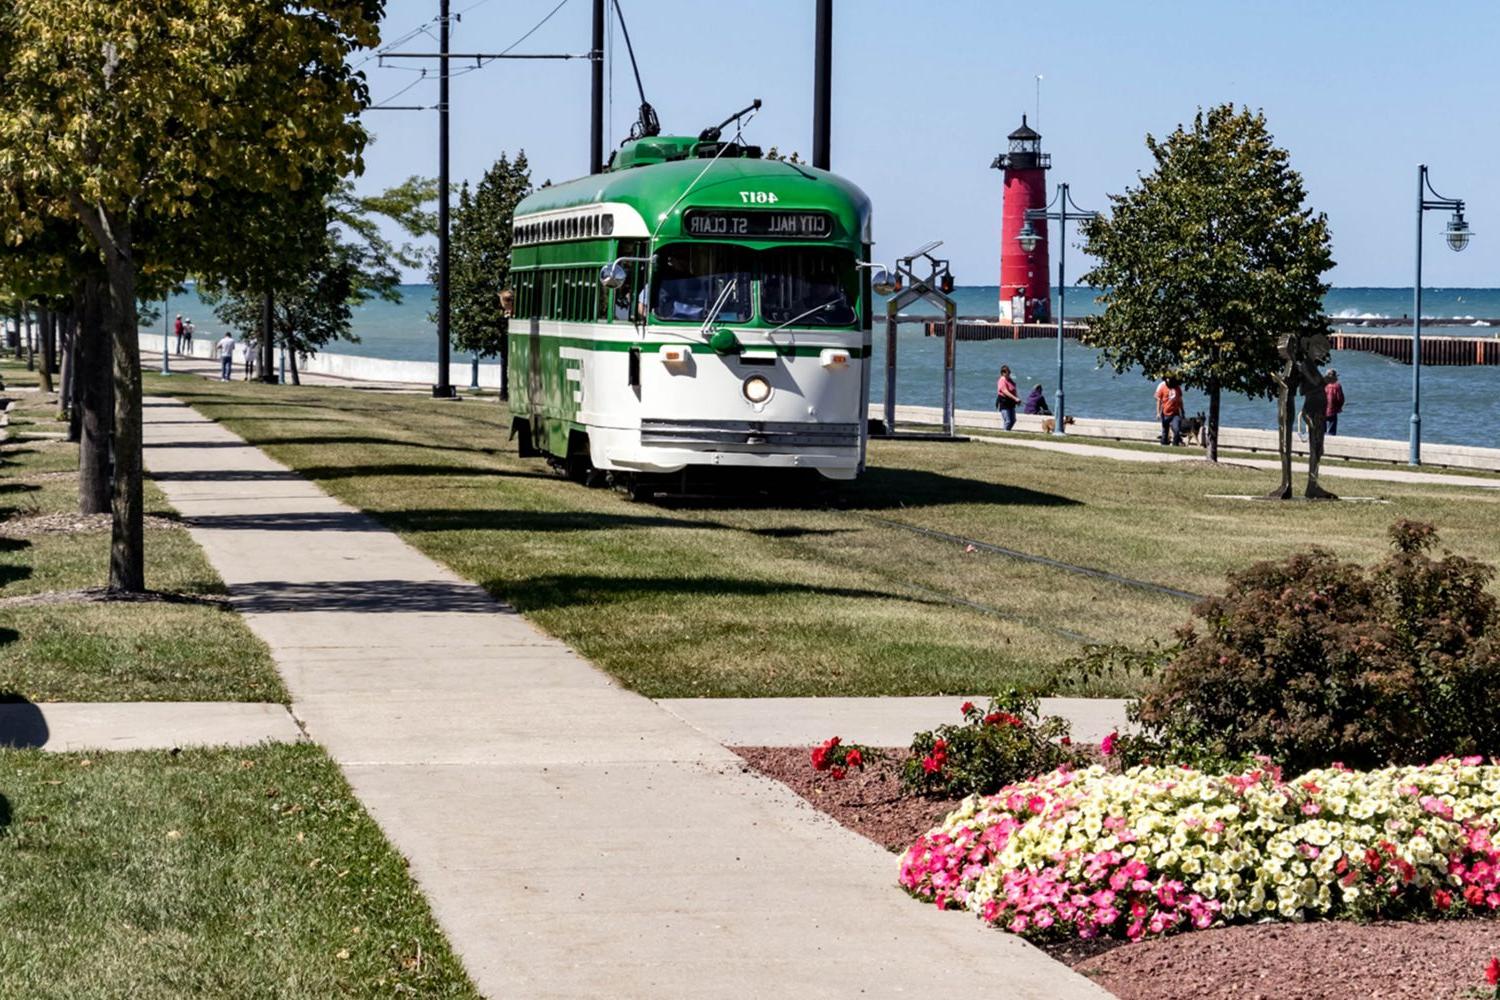 Electric streetcars are just one of the charming aspects of life in Kenosha, Wisconsin.